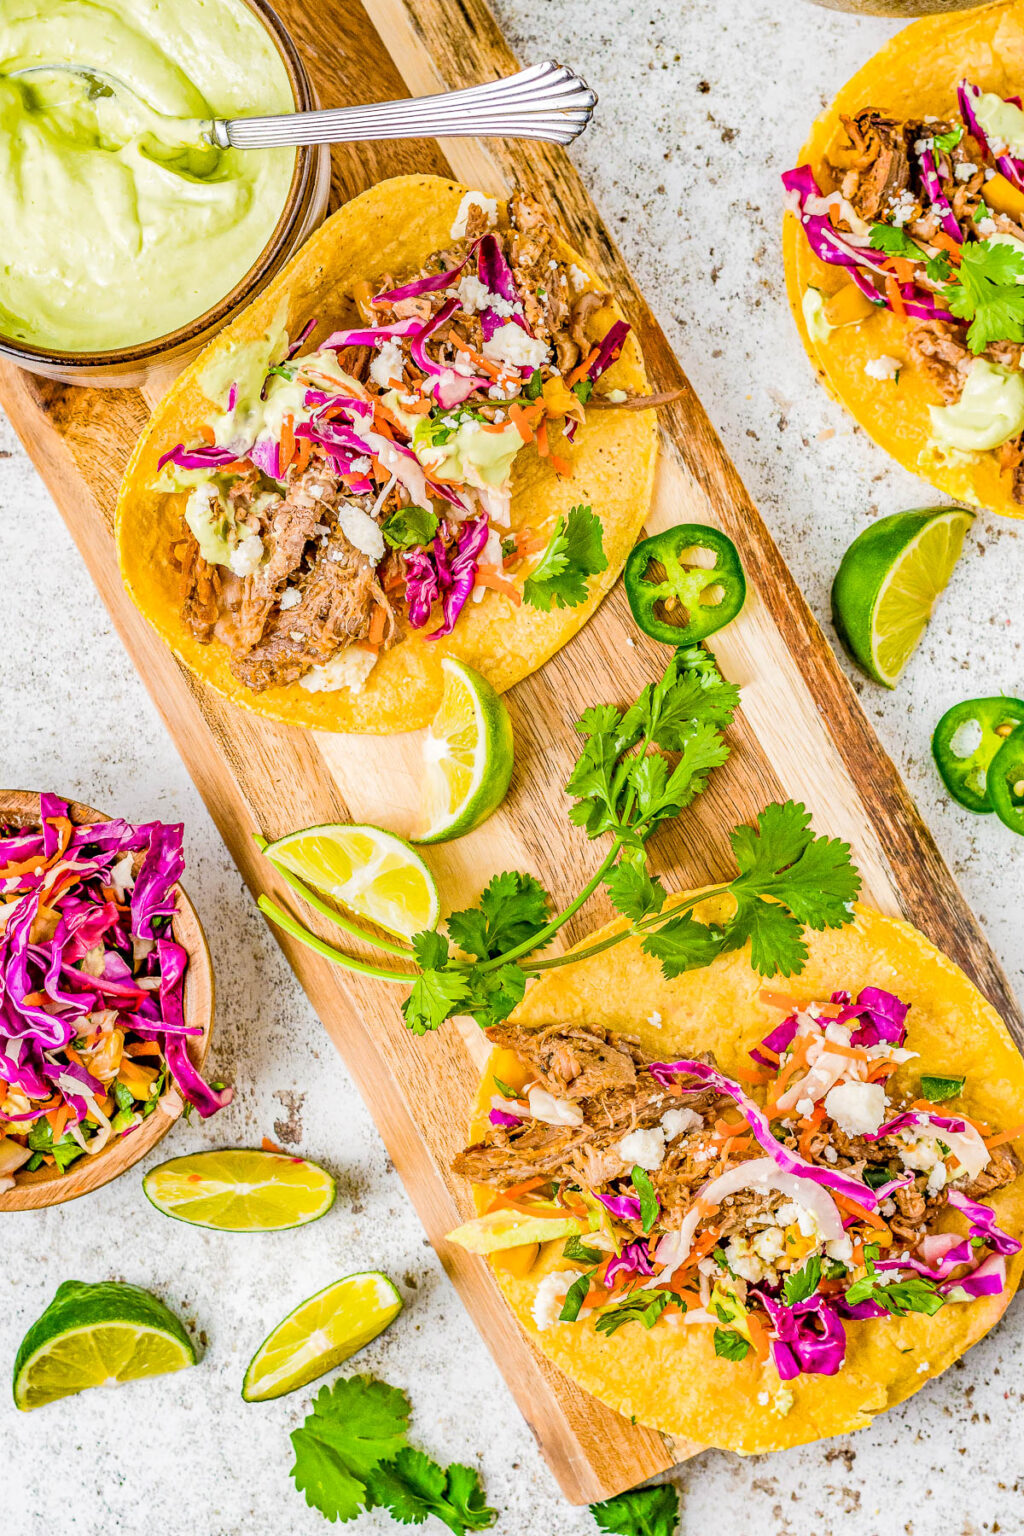 Pulled Pork Tacos (+ Toppings!) - Averie Cooks